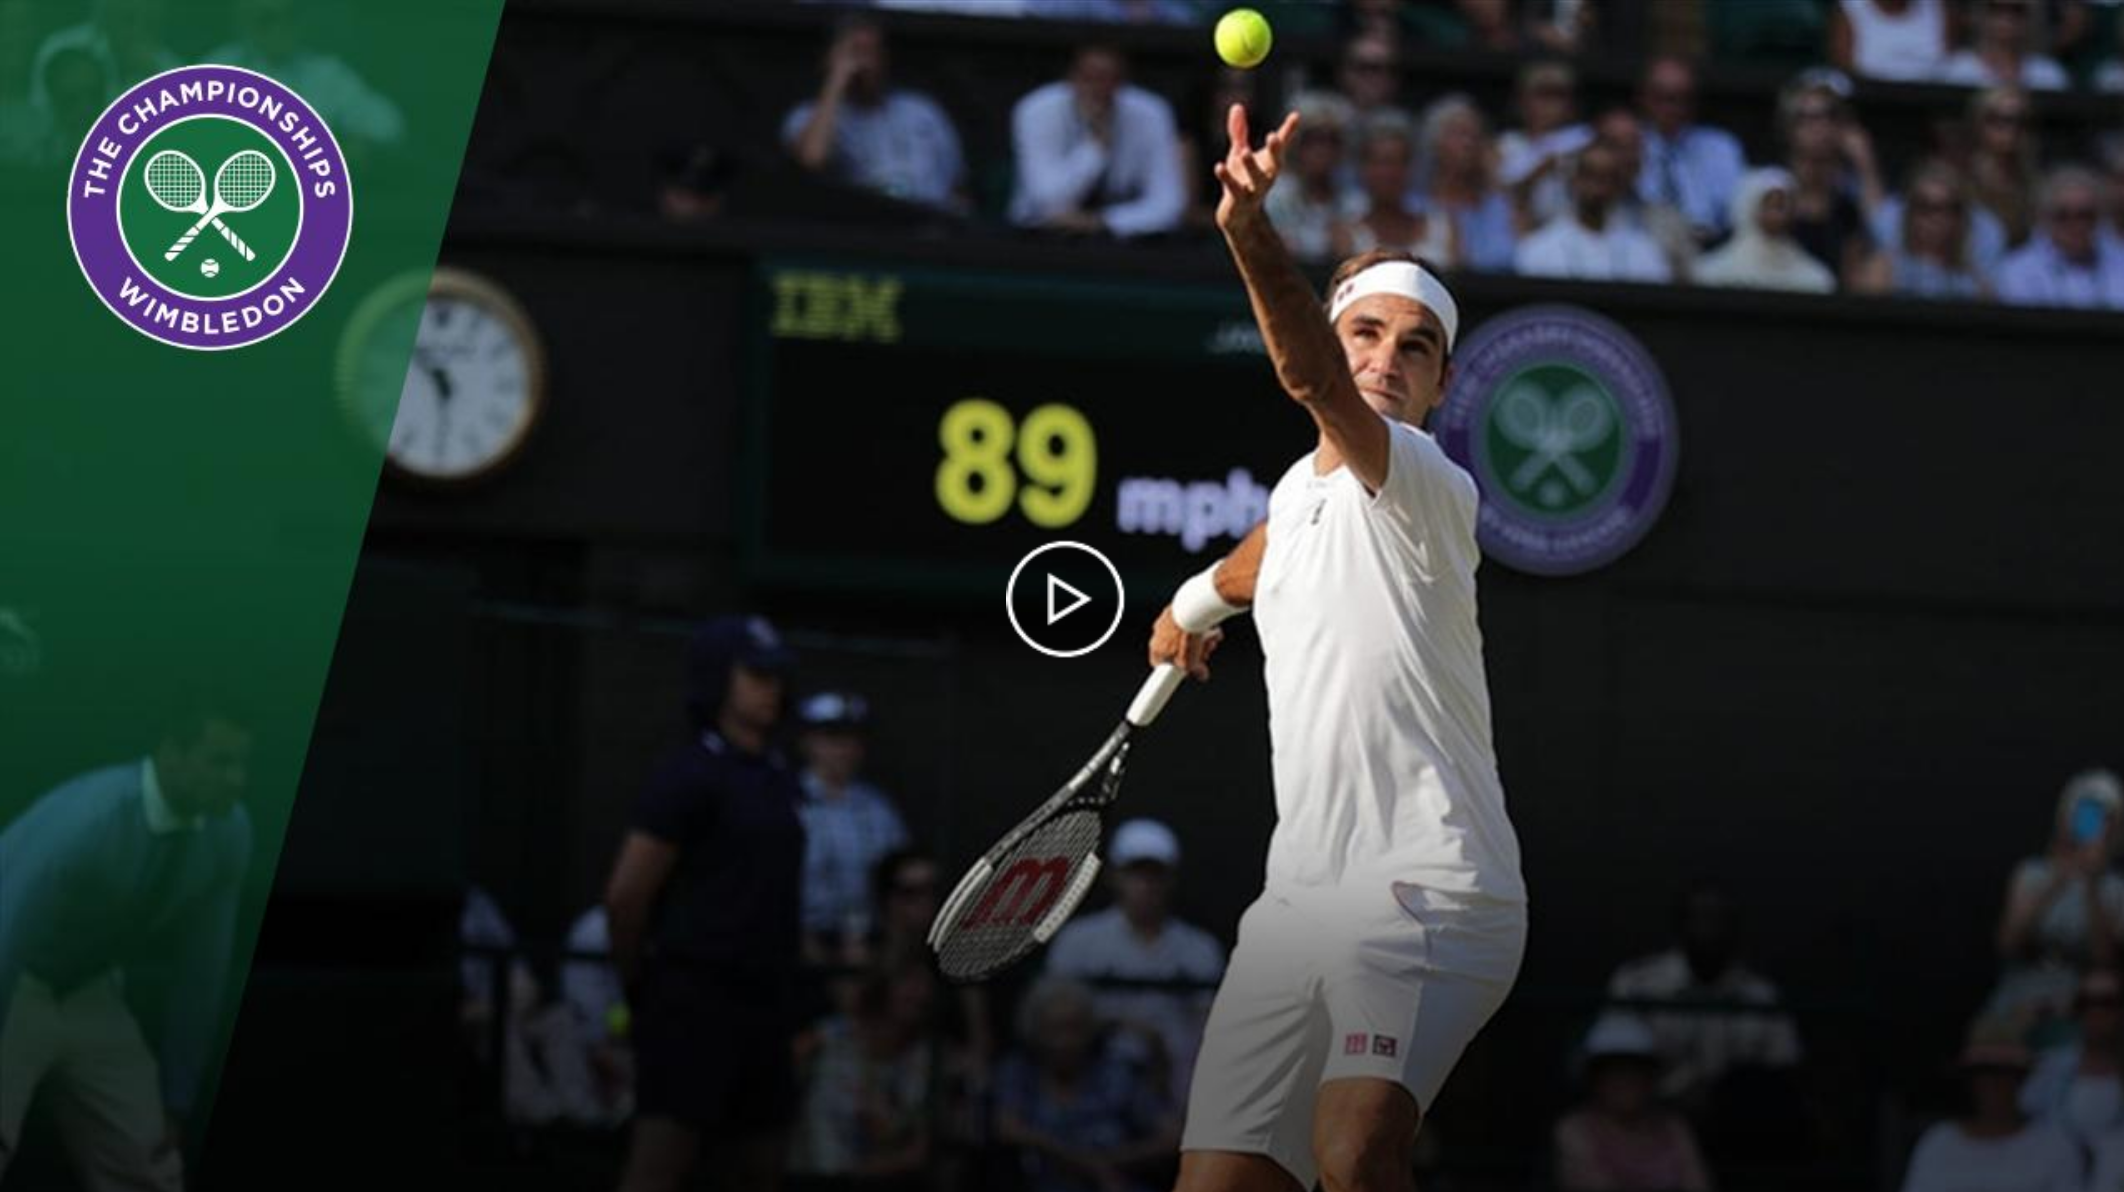 Federer Moves Past Stuff into Wimbledon Fourth Round